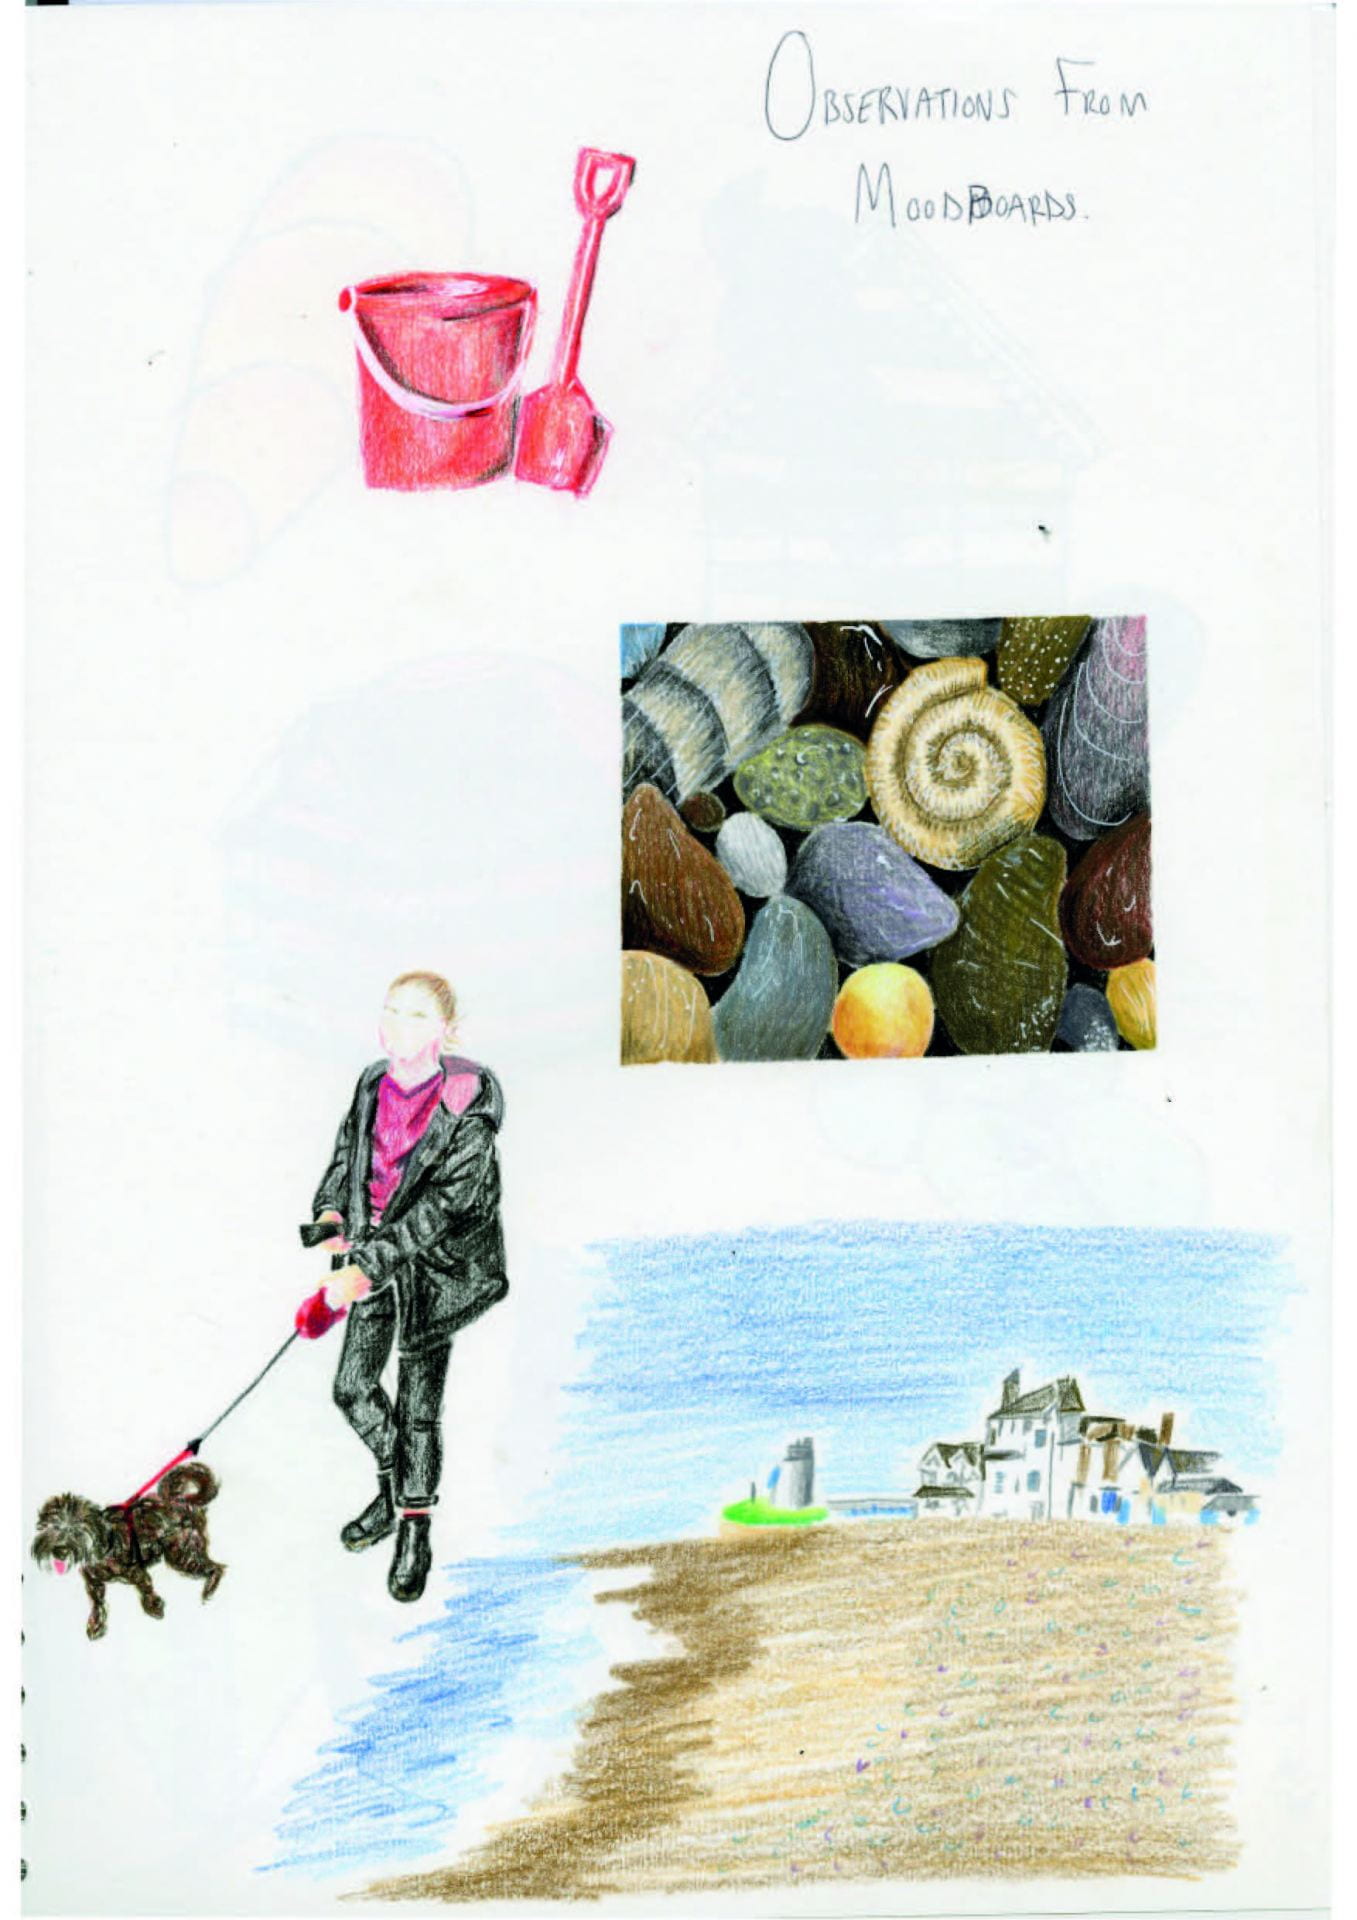 Sketch of a post depicting a red bucket and spade, sea shells and someone walking their dog on the beach.